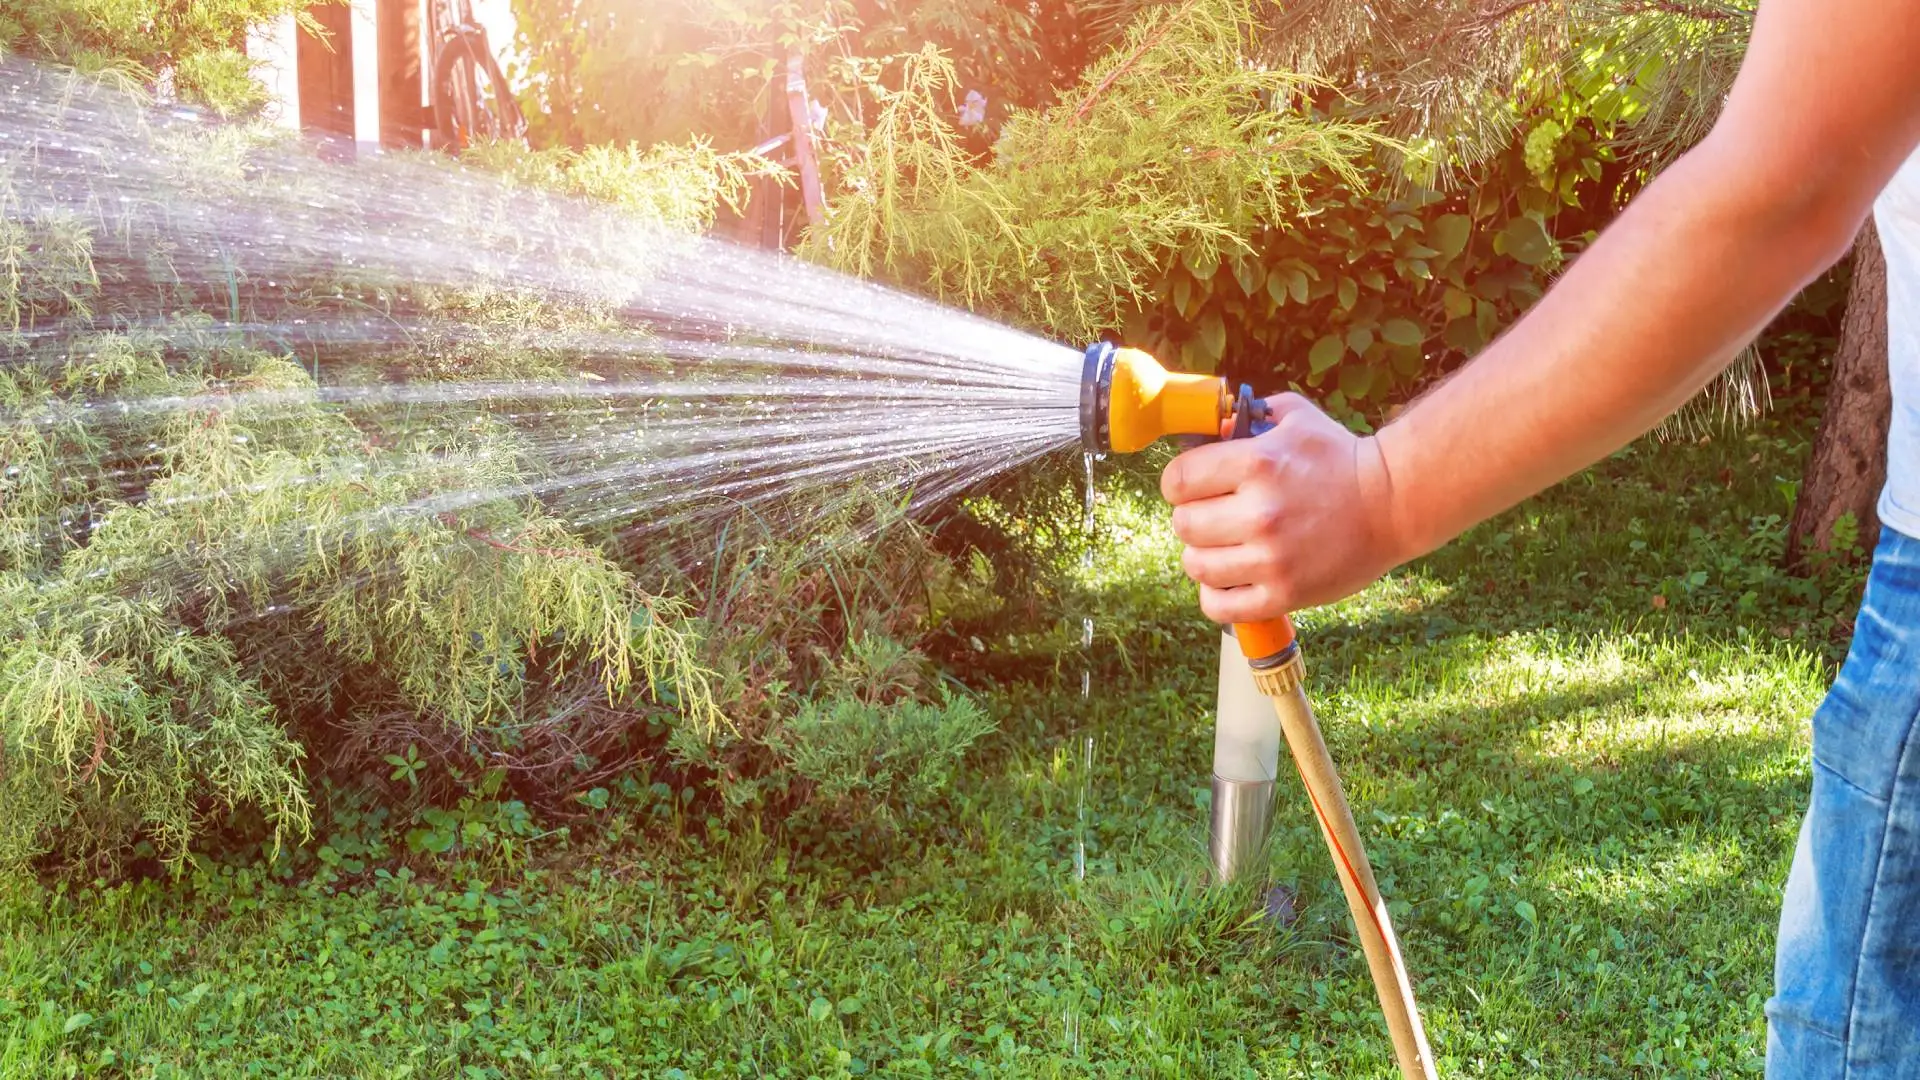 When Should I Water My Lawn